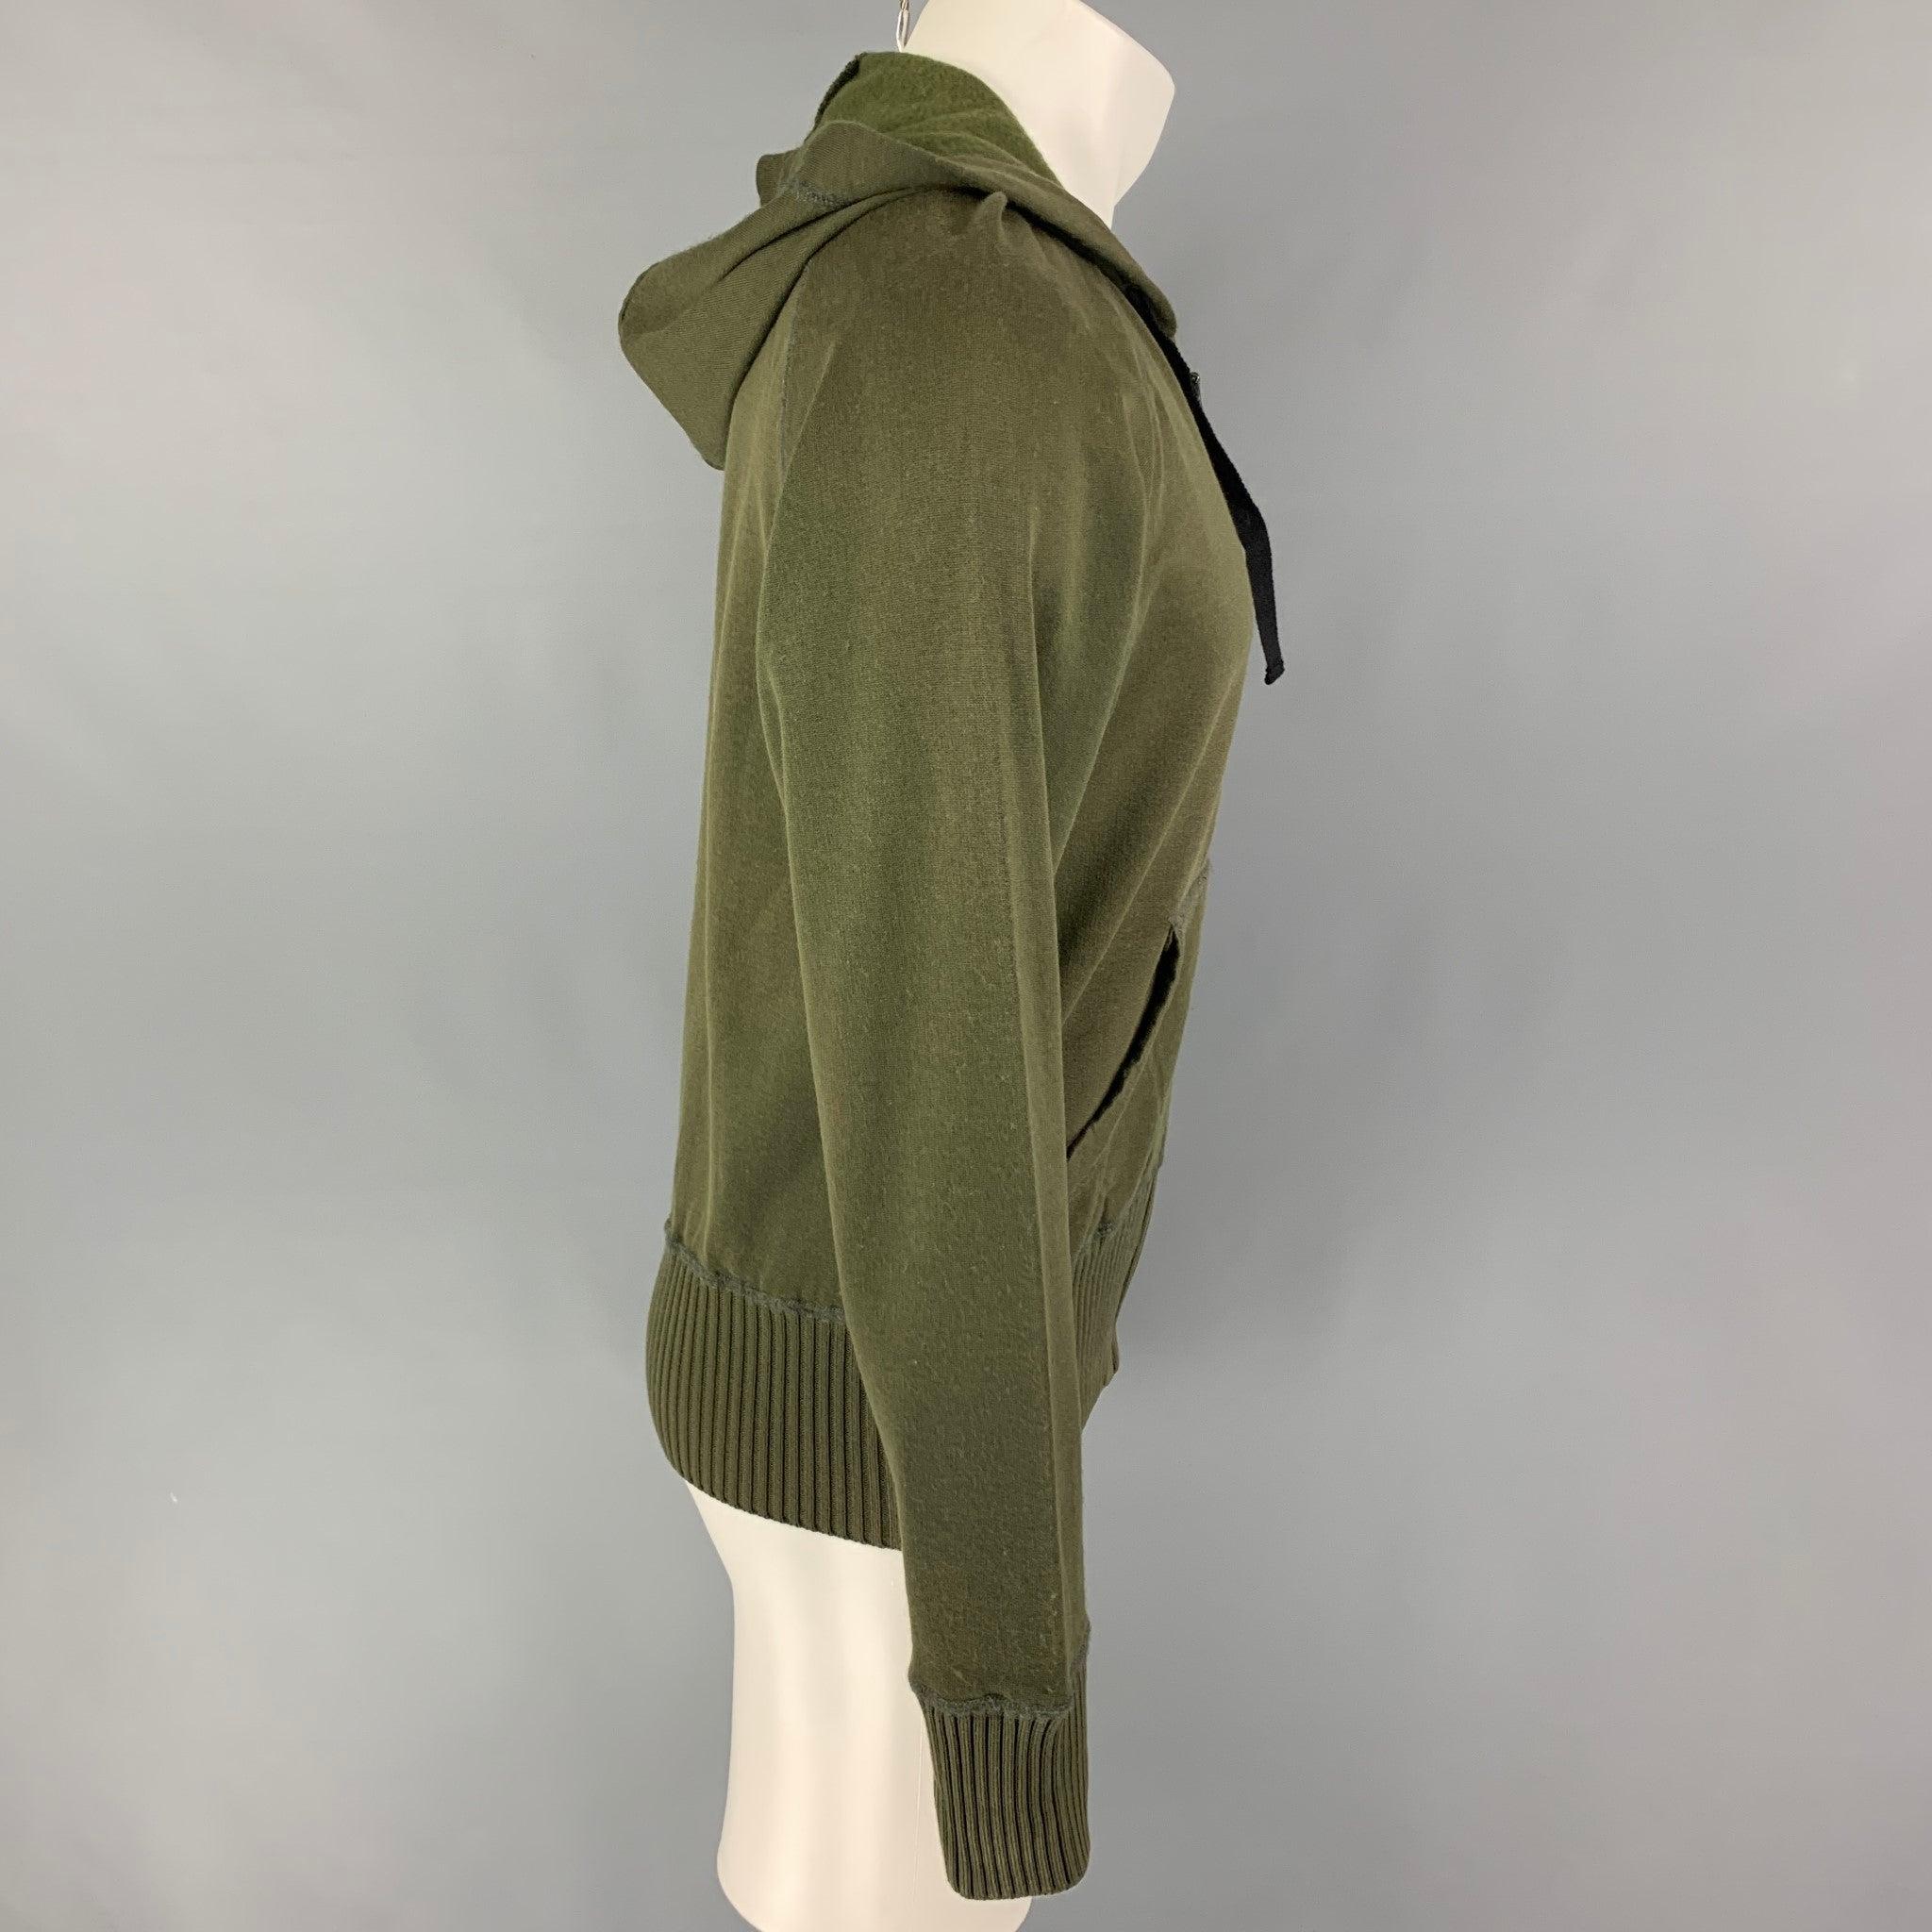 BOTTEGA VENETA sweatshirt comes in a olive cotton featuring a hooded style, ribbed hem, front pockets, black woven leather trim, and a full zip up closure. Made in Italy.
Very Good
Pre-Owned Condition. Small mark at front.  

Marked:   50